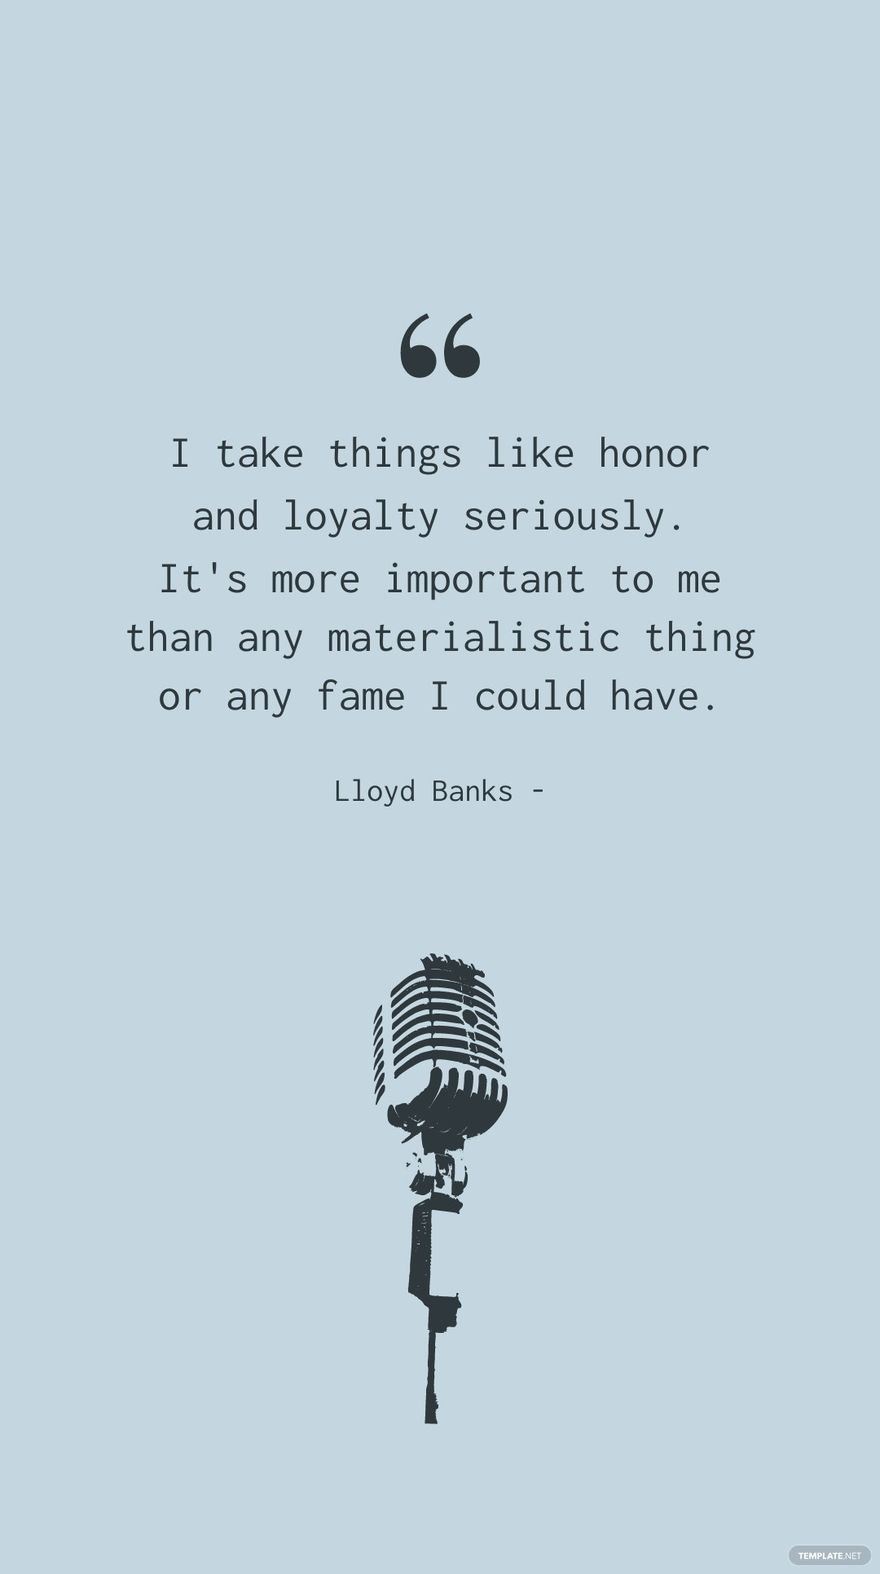 Lloyd Banks - I take things like honor and loyalty seriously. It's more important to me than any materialistic thing or any fame I could have.